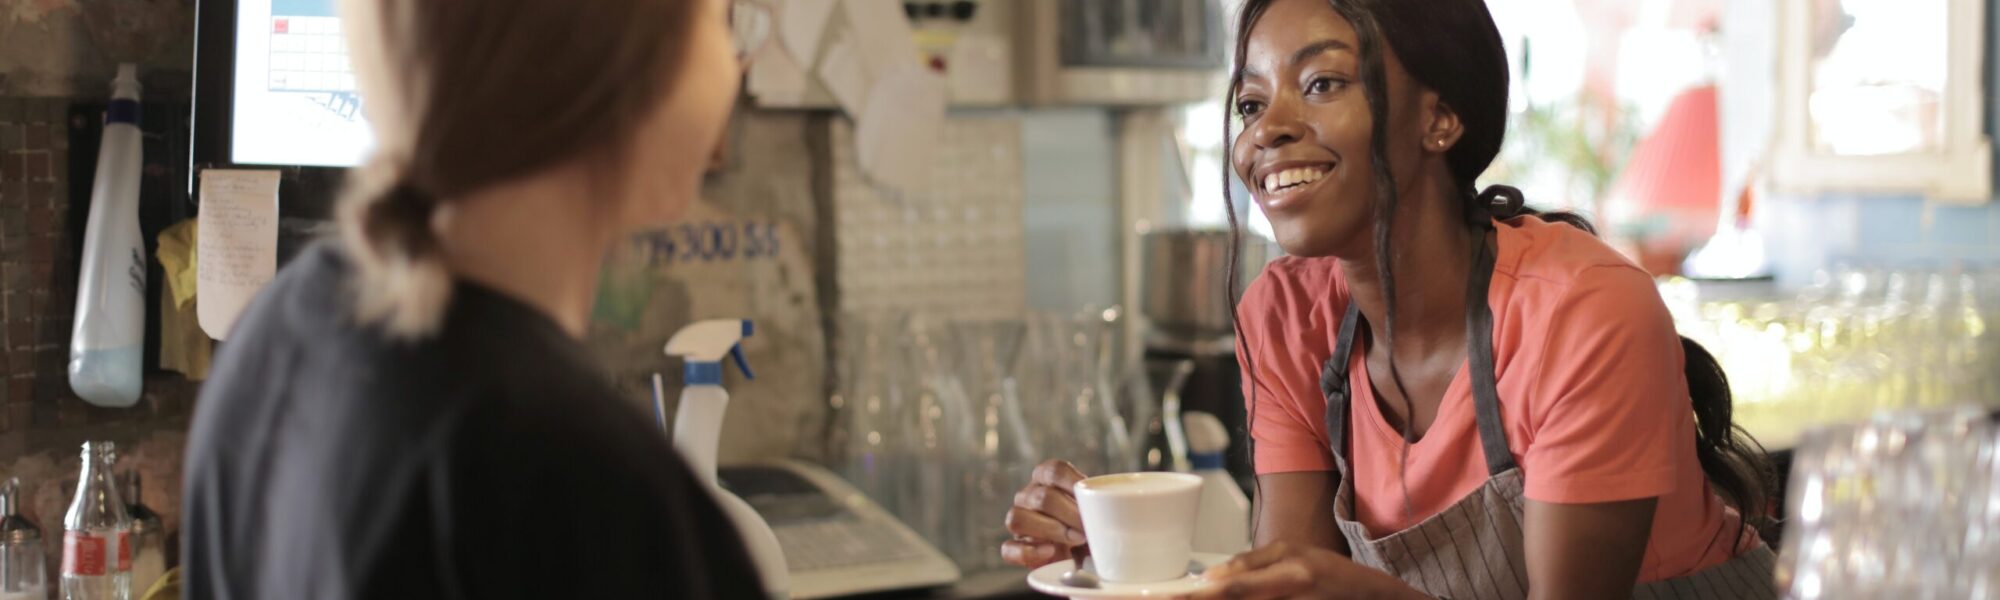 a cafe worker speaking with a customer